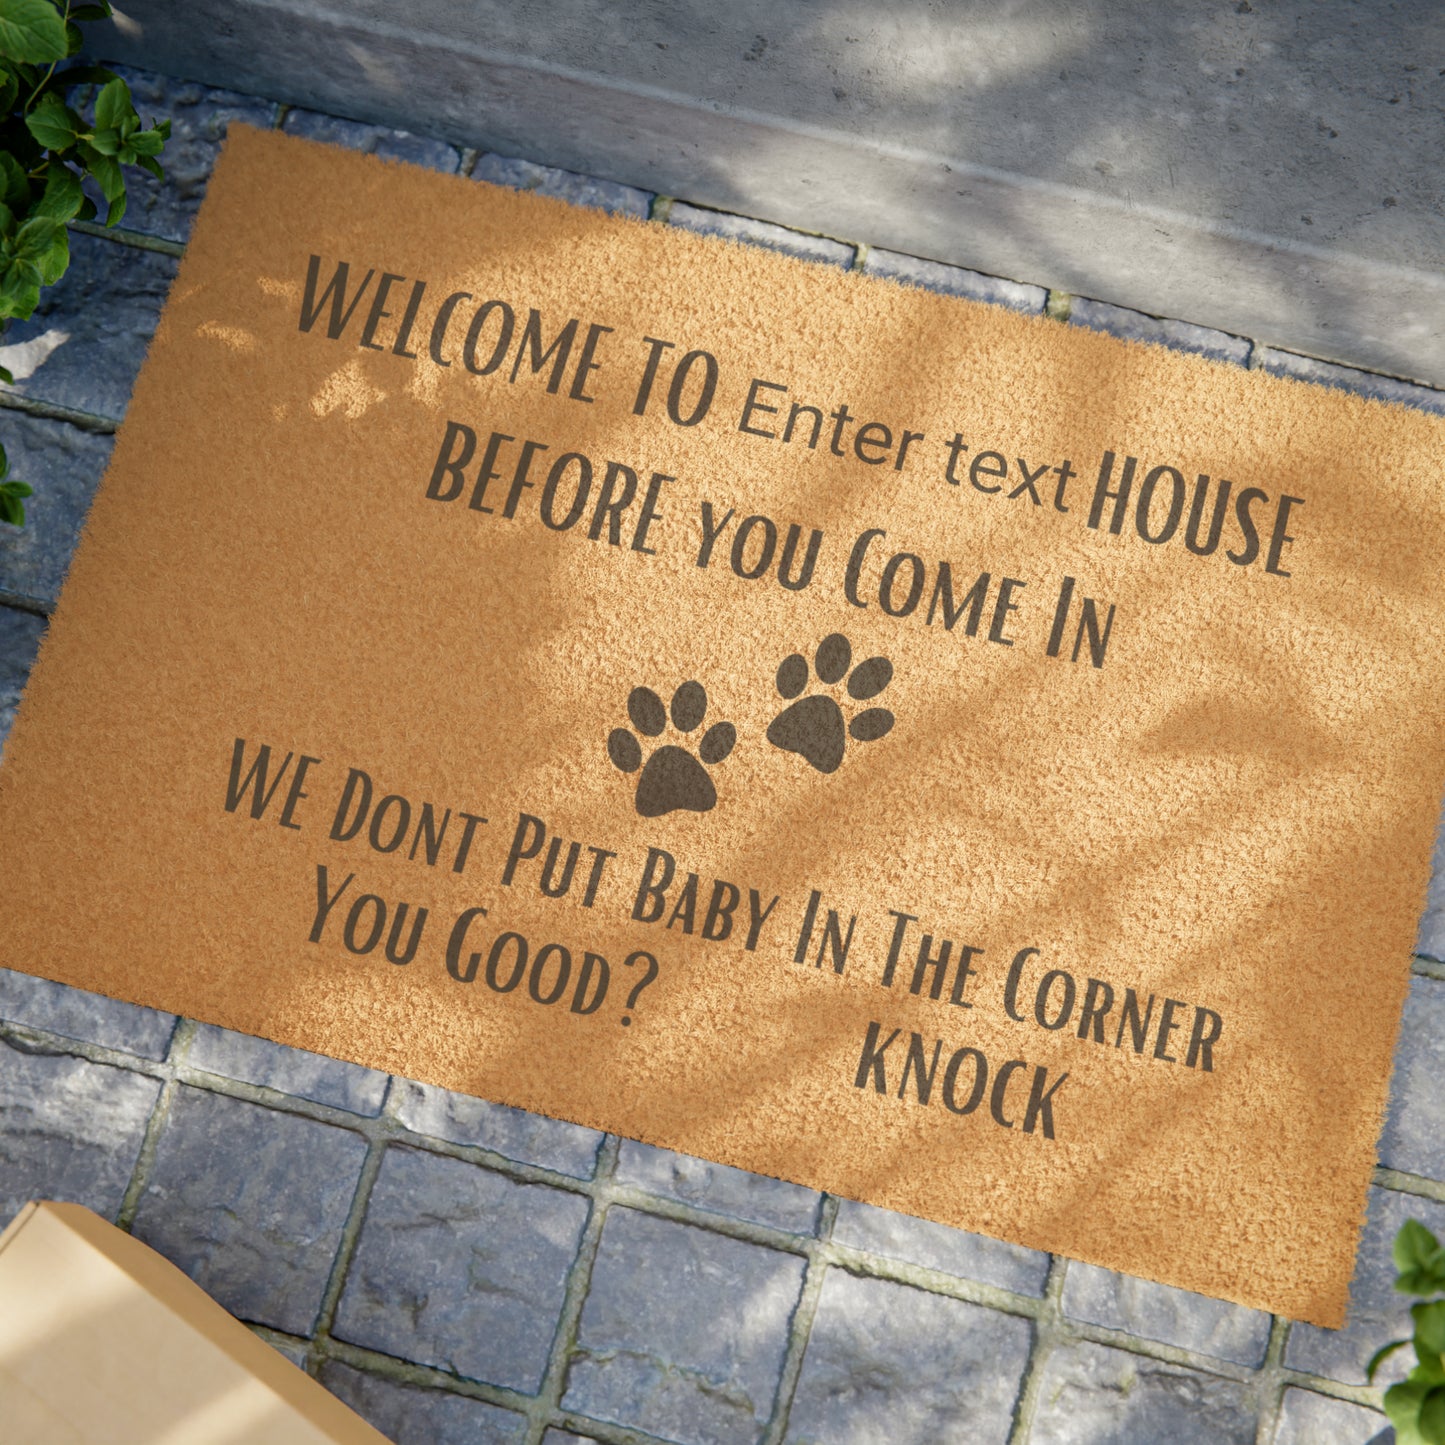 Personalize | Before you come in this is (name ) House.Doormat